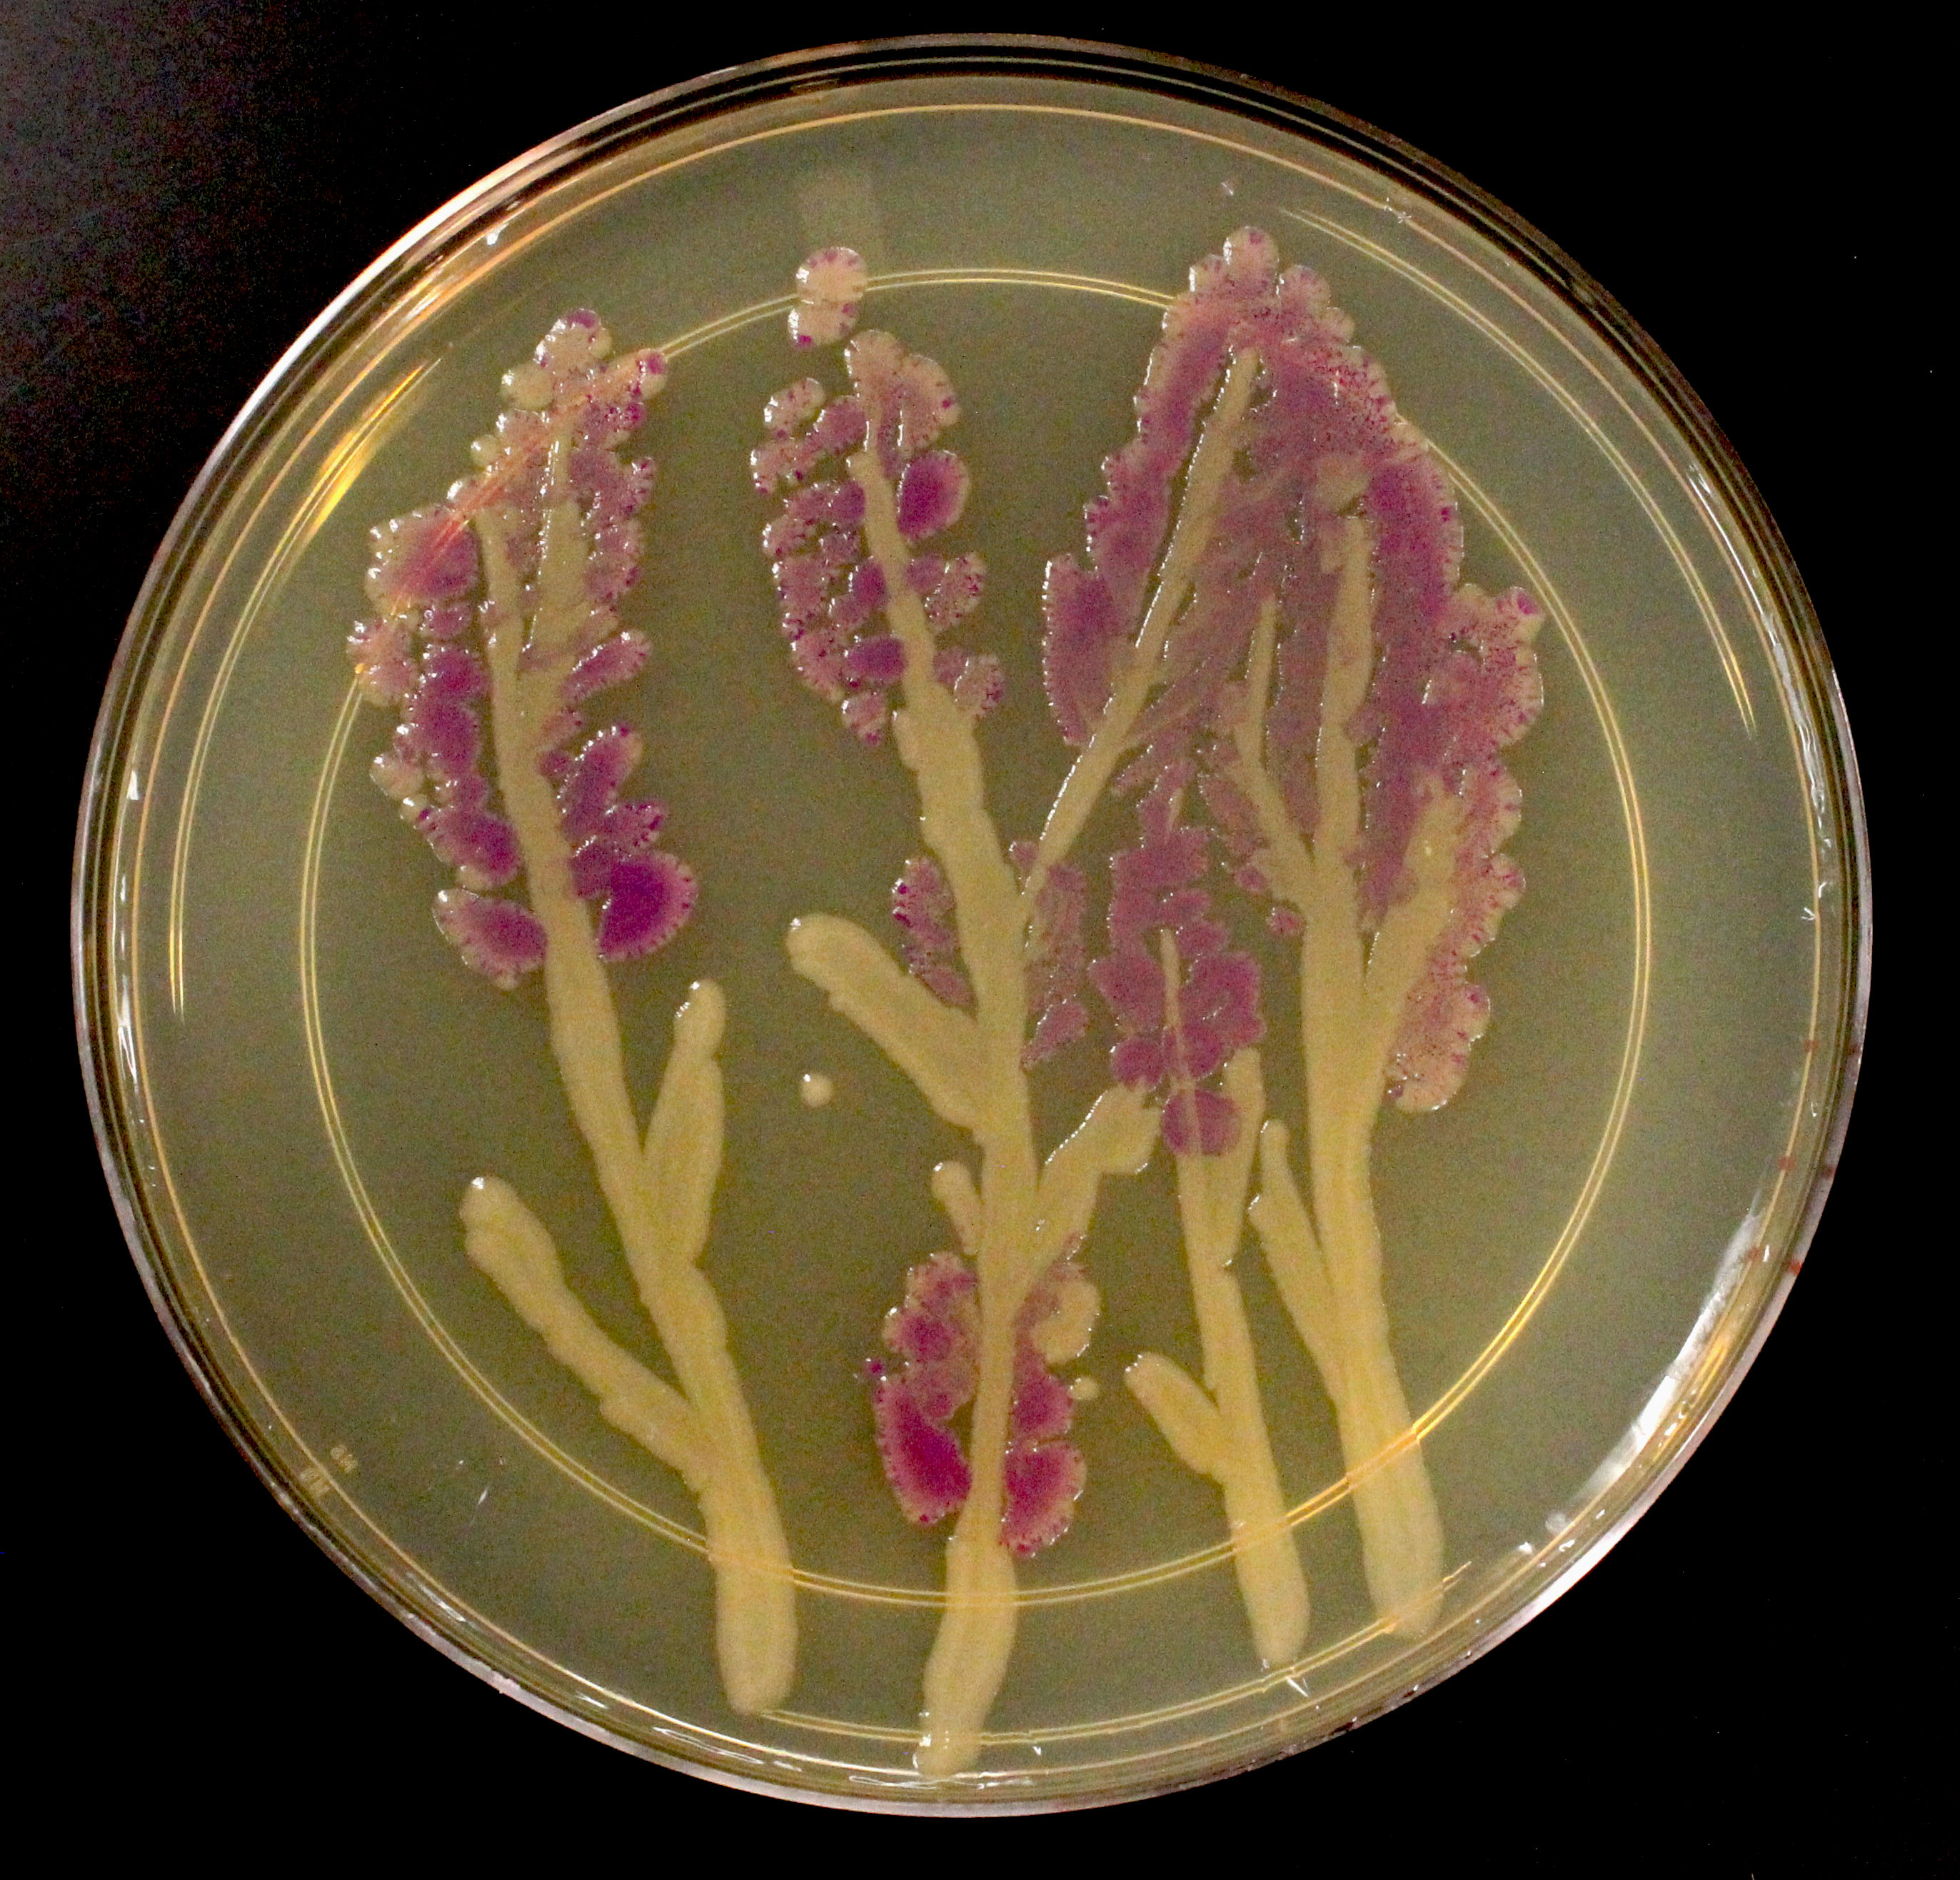 Petri dish with pink flowers painted on using bacteria.